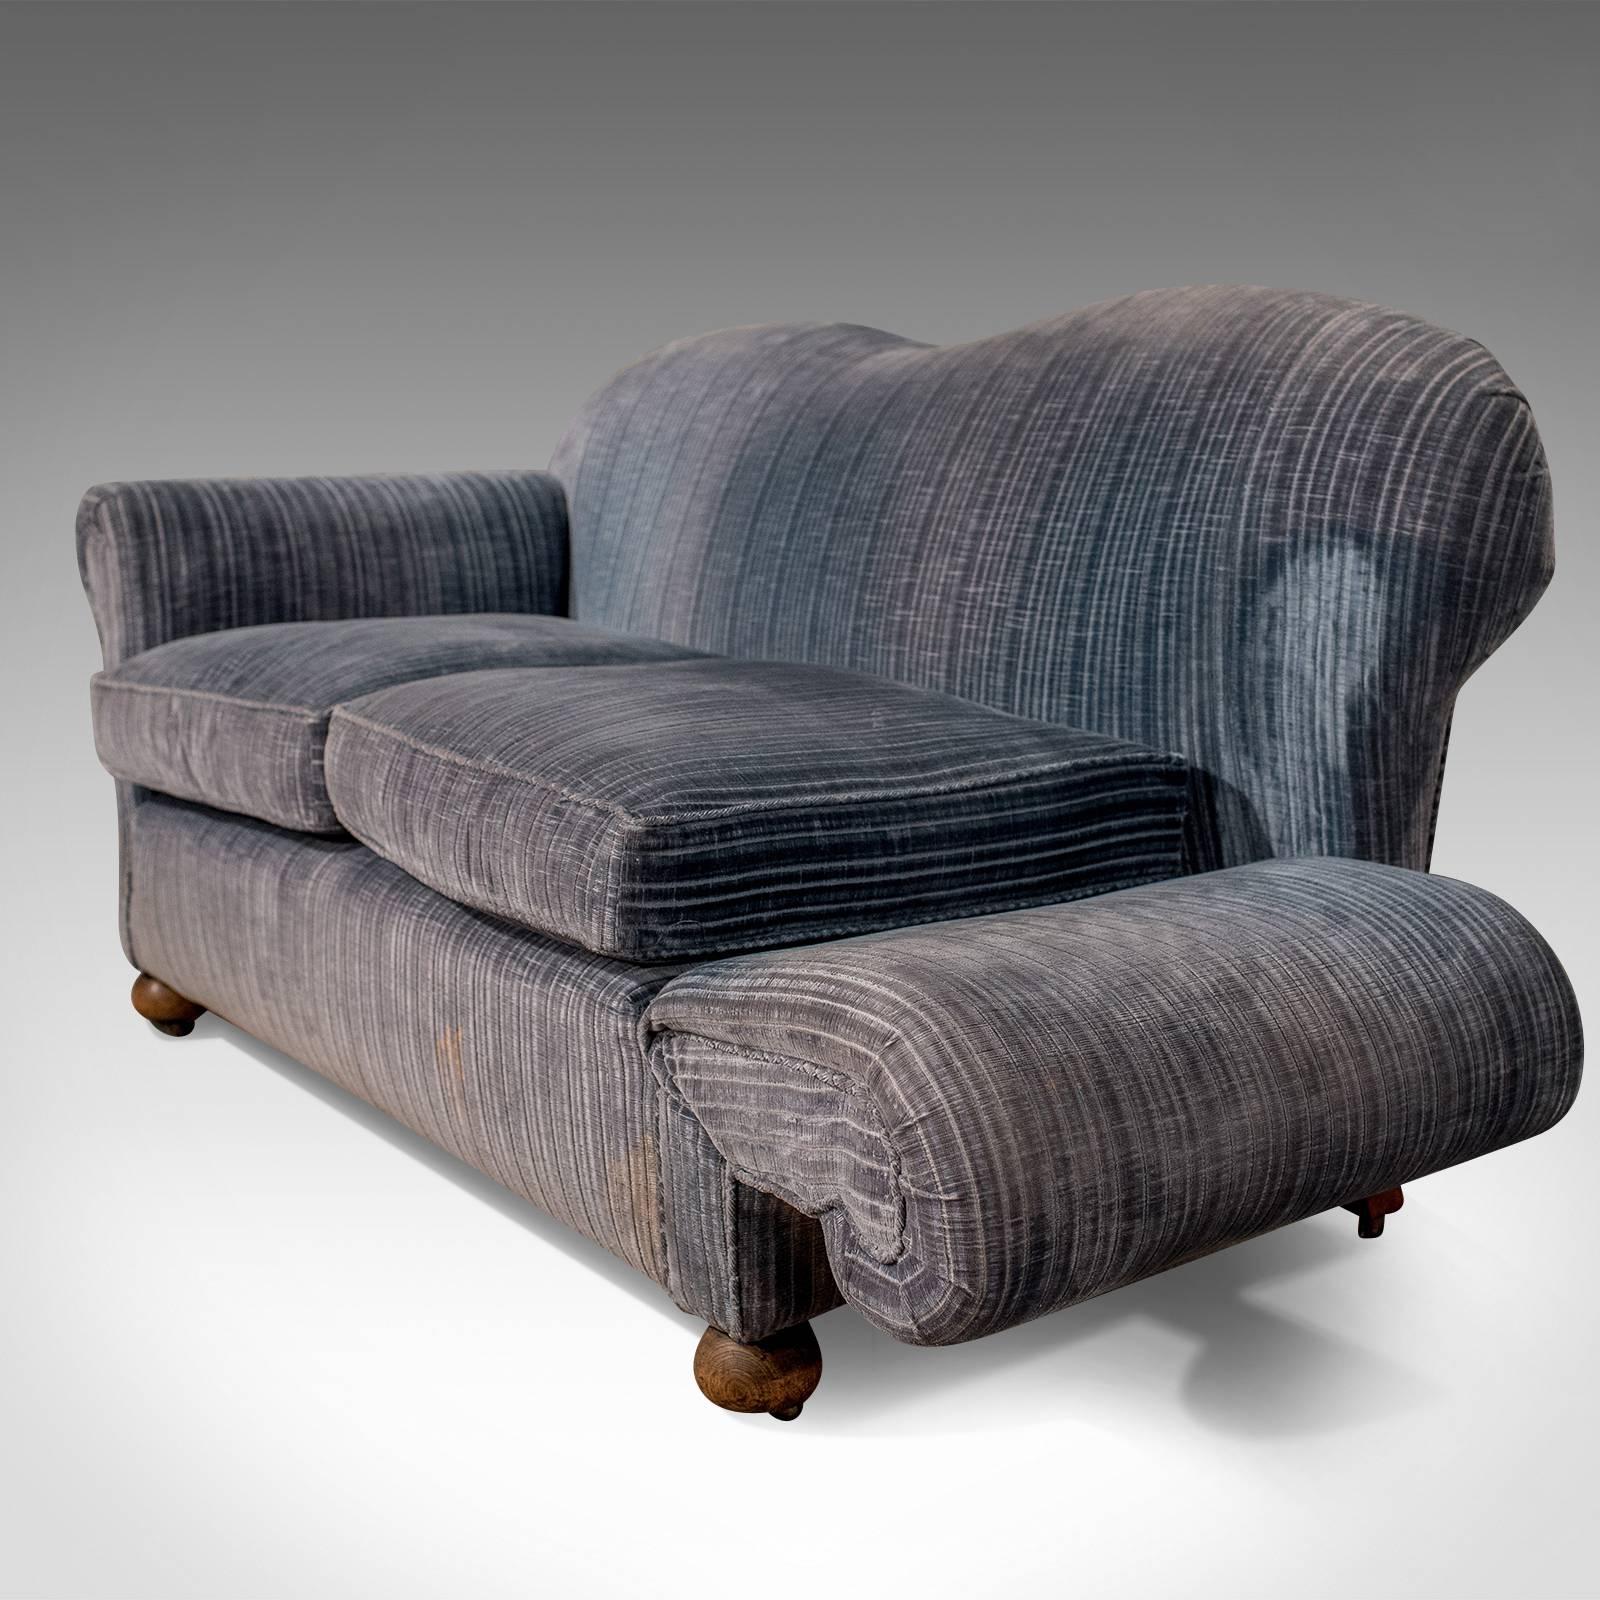 Great Britain (UK) Antique Victorian Chesterfield Sofa Drop Arm Settee Blue Two-Seat, circa 1900